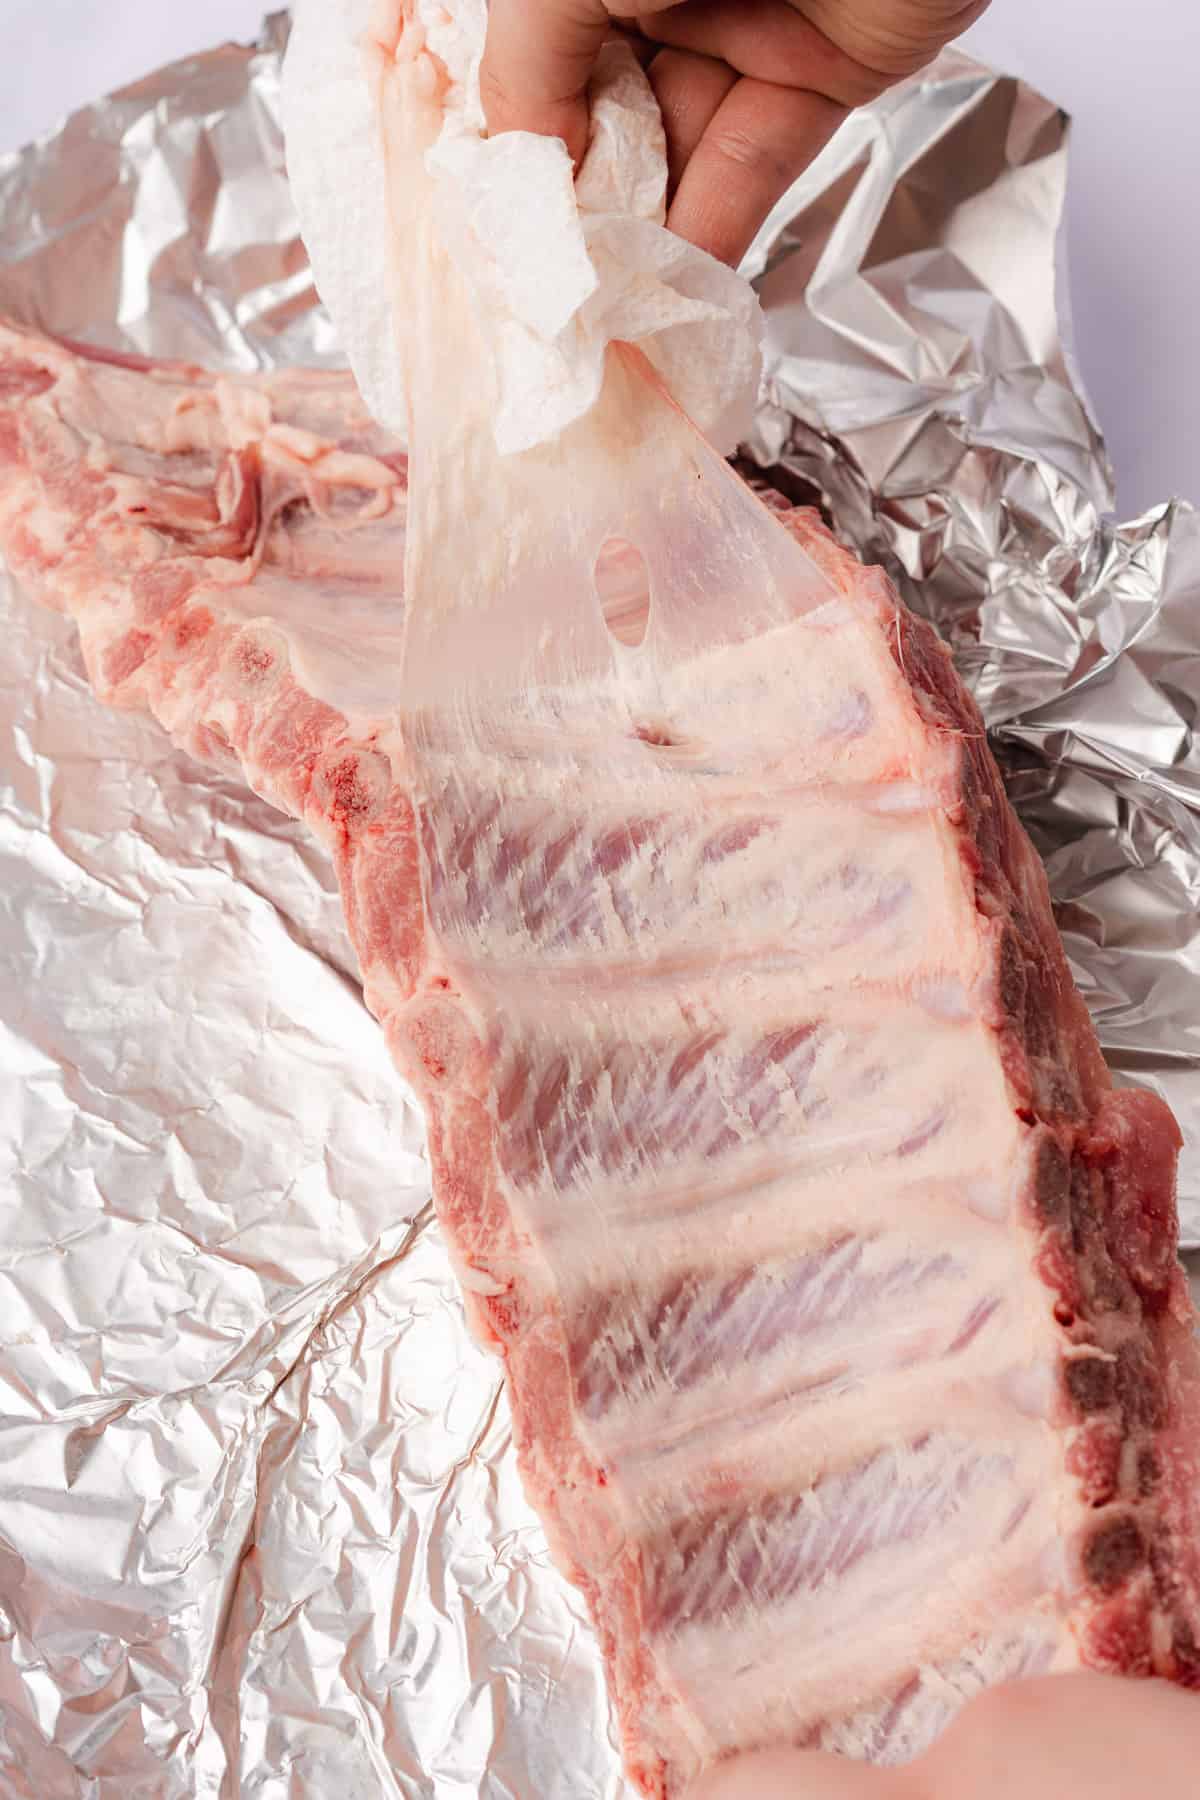 paper towel with thin membrane of pork ribs